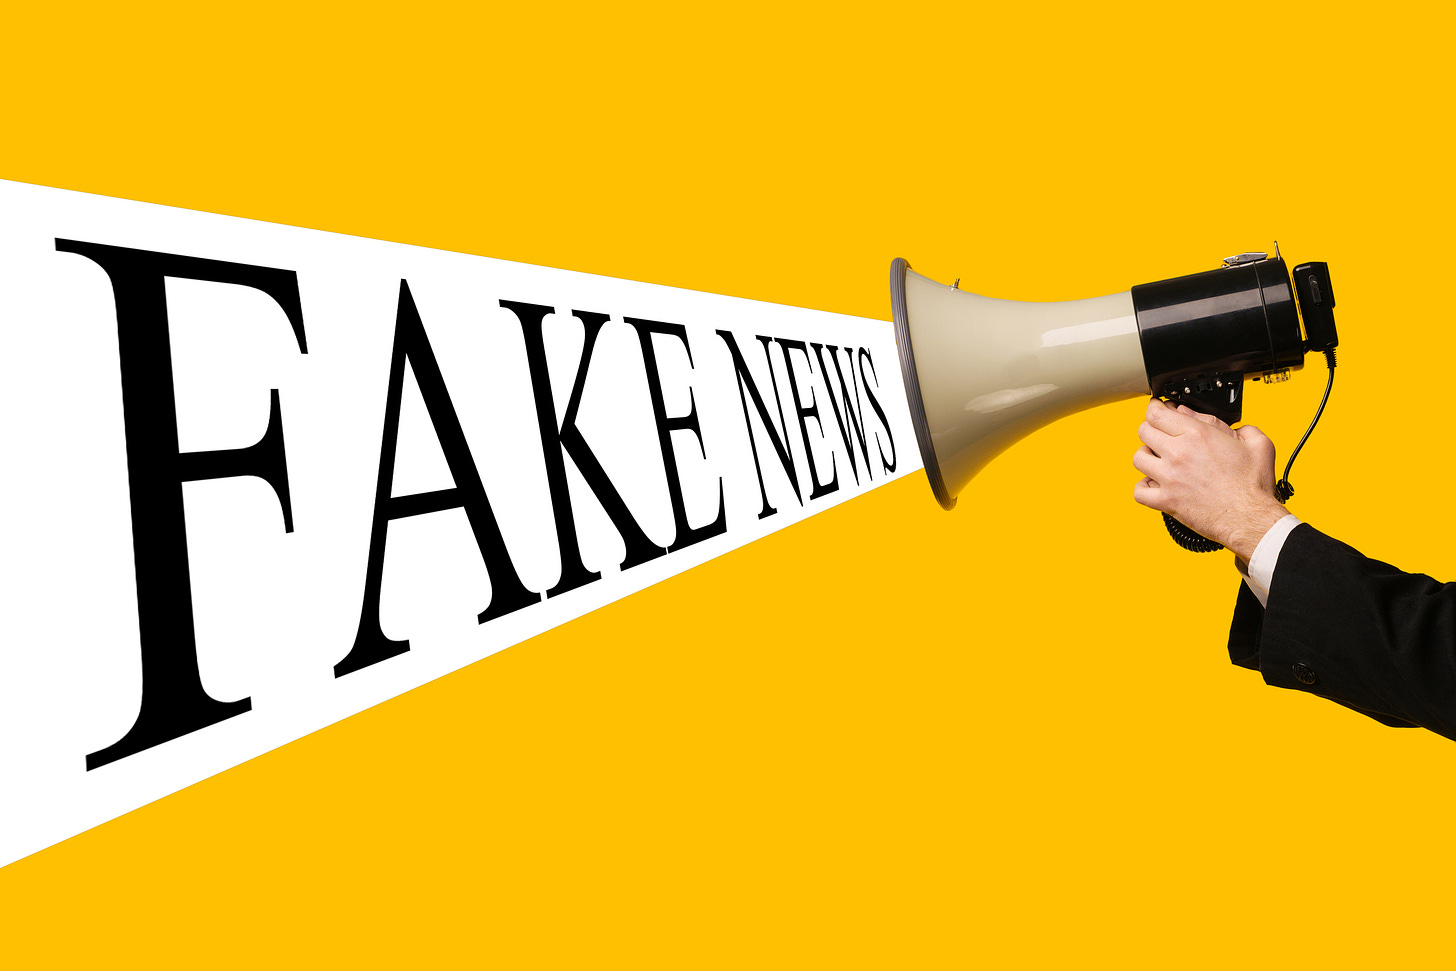 Image of man in suit holding a megaphone. The words, "FAKE NEWS" are shown as if coming out of the megaphone.